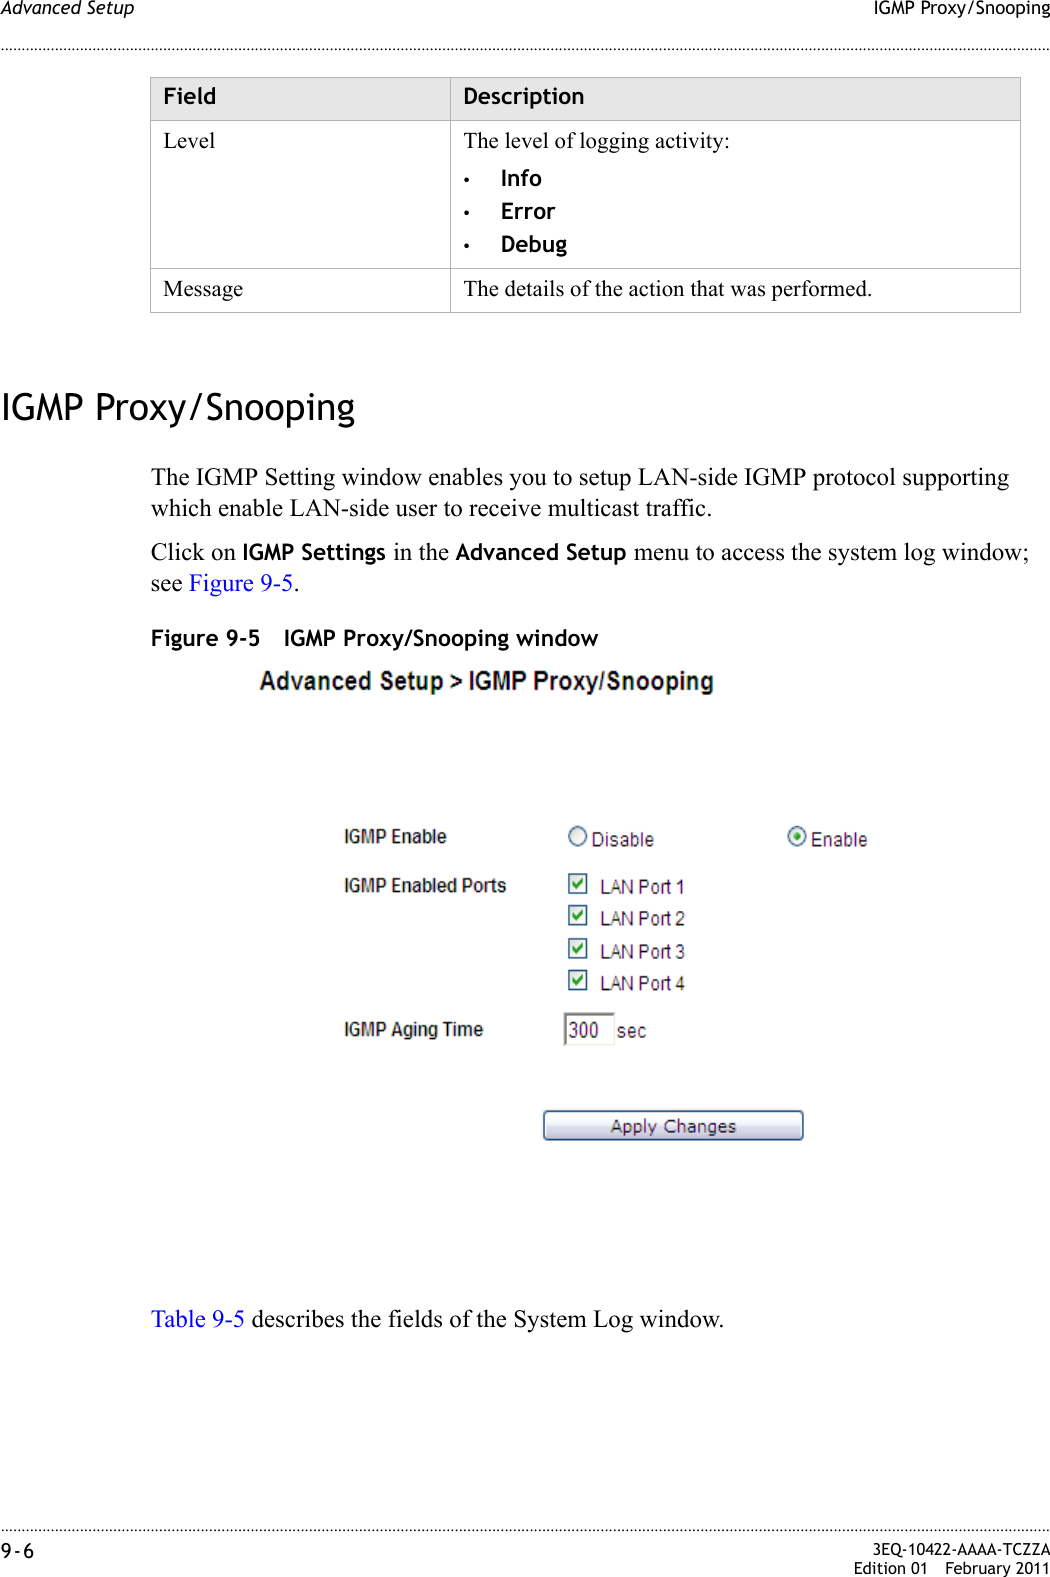 ............................................................................................................................................................................................................................................................IGMP Proxy/SnoopingAdvanced Setup9-6  3EQ-10422-AAAA-TCZZAEdition 01 February 2011............................................................................................................................................................................................................................................................IGMP Proxy/SnoopingThe IGMP Setting window enables you to setup LAN-side IGMP protocol supporting which enable LAN-side user to receive multicast traffic.Click on IGMP Settings in the Advanced Setup menu to access the system log window; see Figure 9-5.Figure 9-5 IGMP Proxy/Snooping windowTable 9-5 describes the fields of the System Log window.Level The level of logging activity:•Info•Error•DebugMessage The details of the action that was performed.Field Description